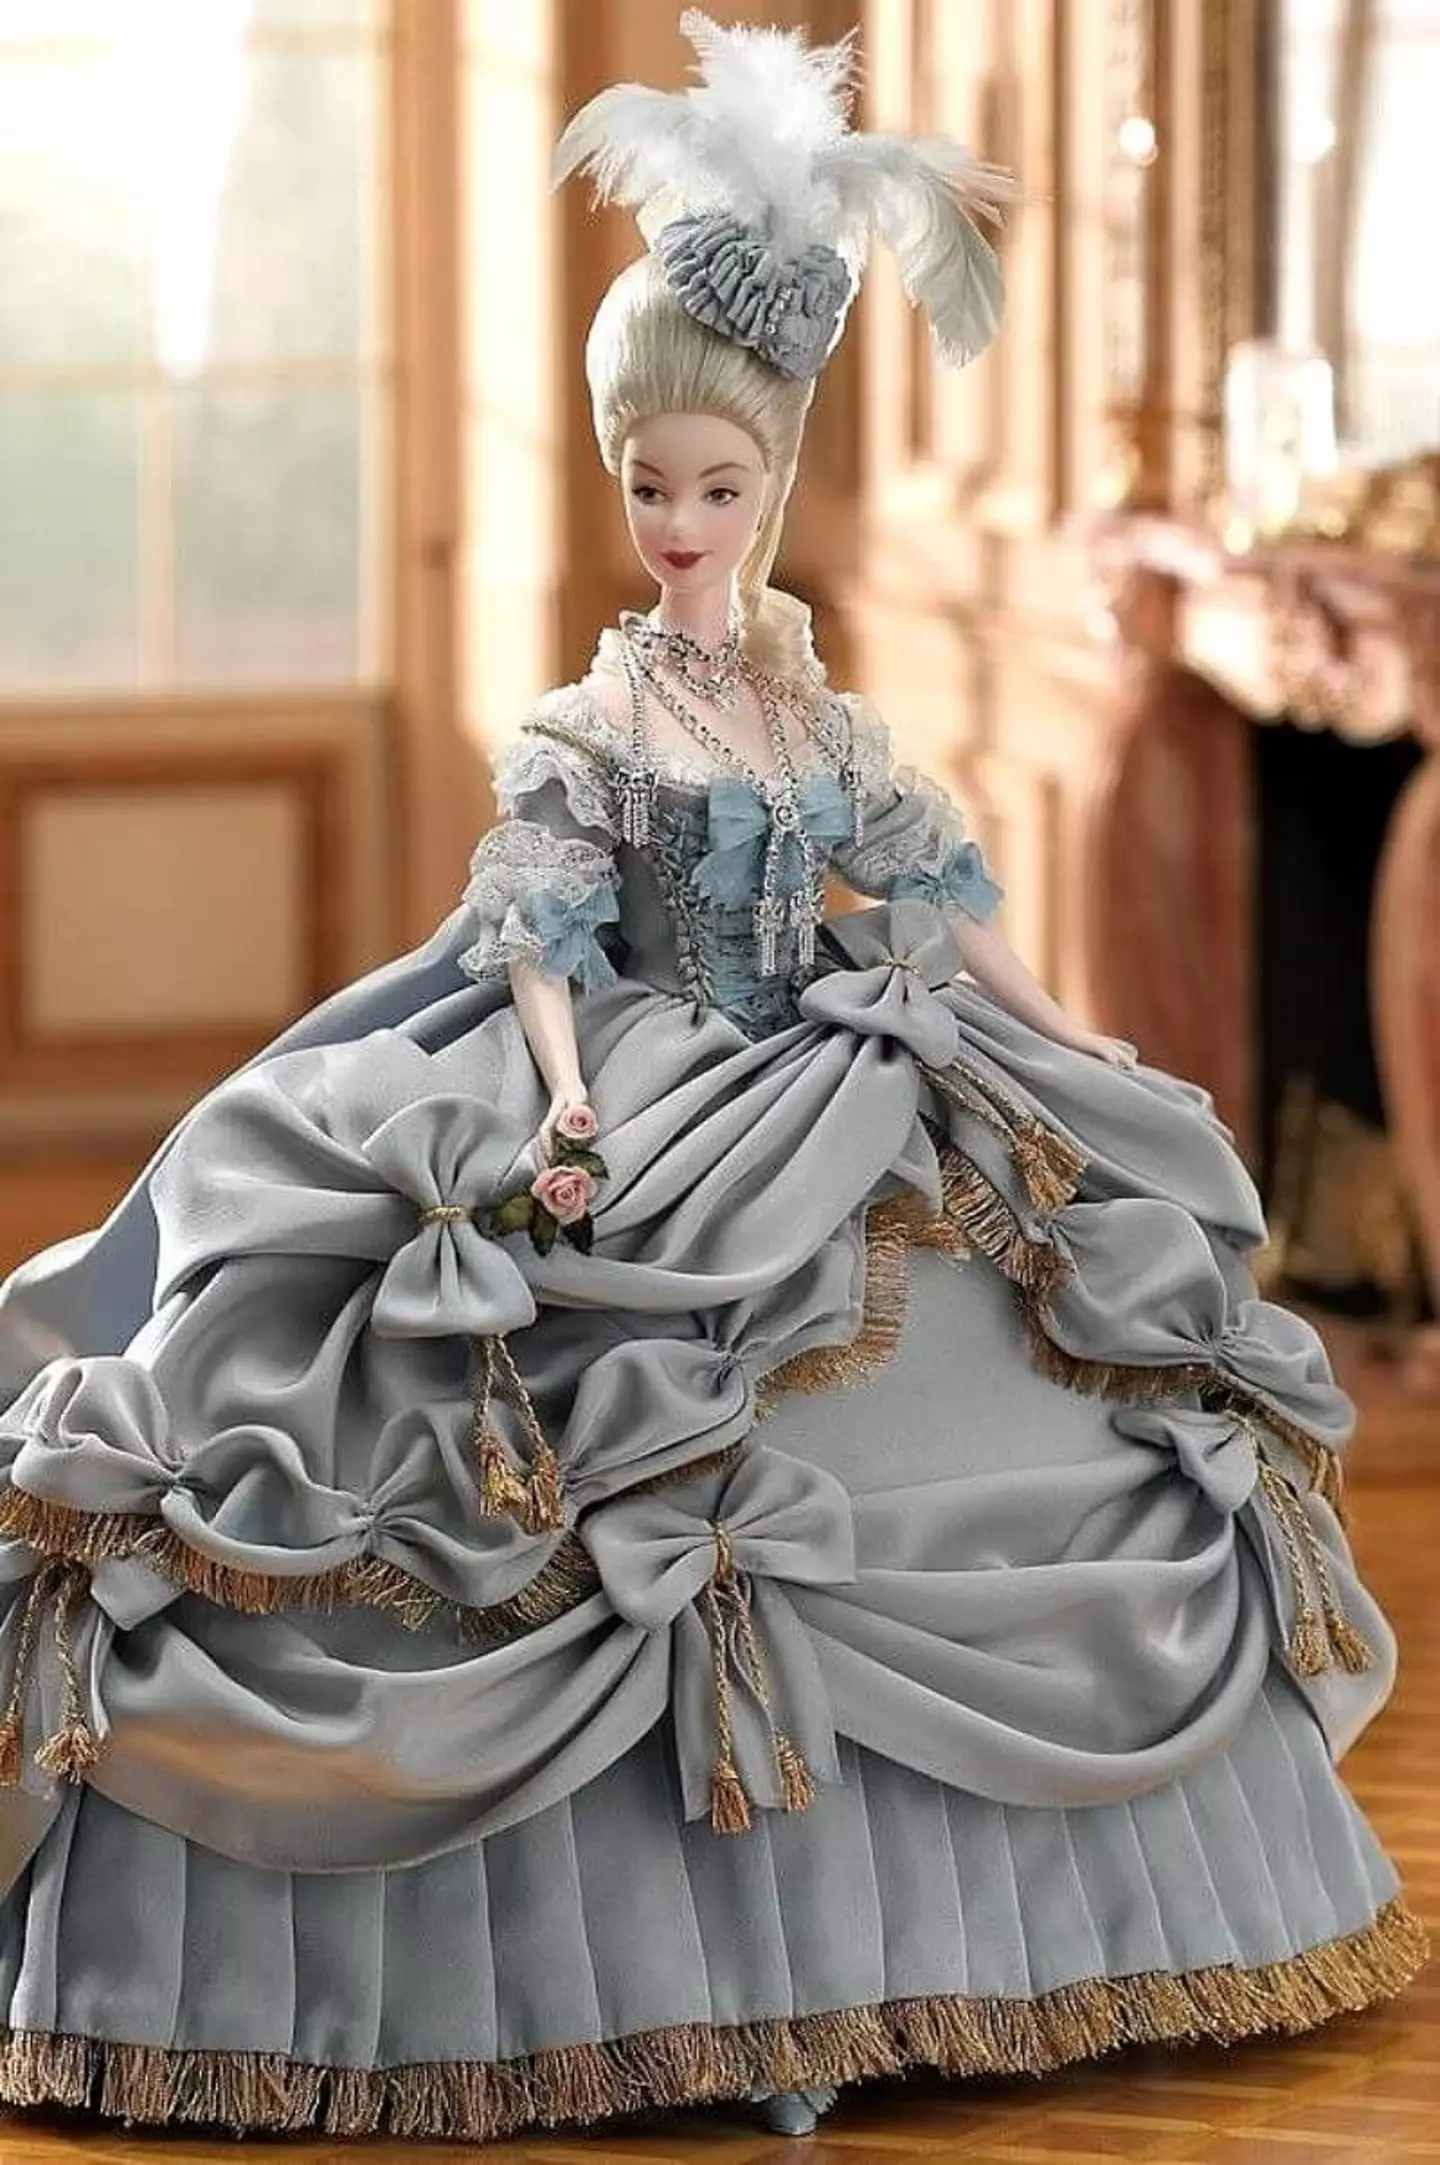 The Marie Antoinette Barbie is based on a real-life royal.